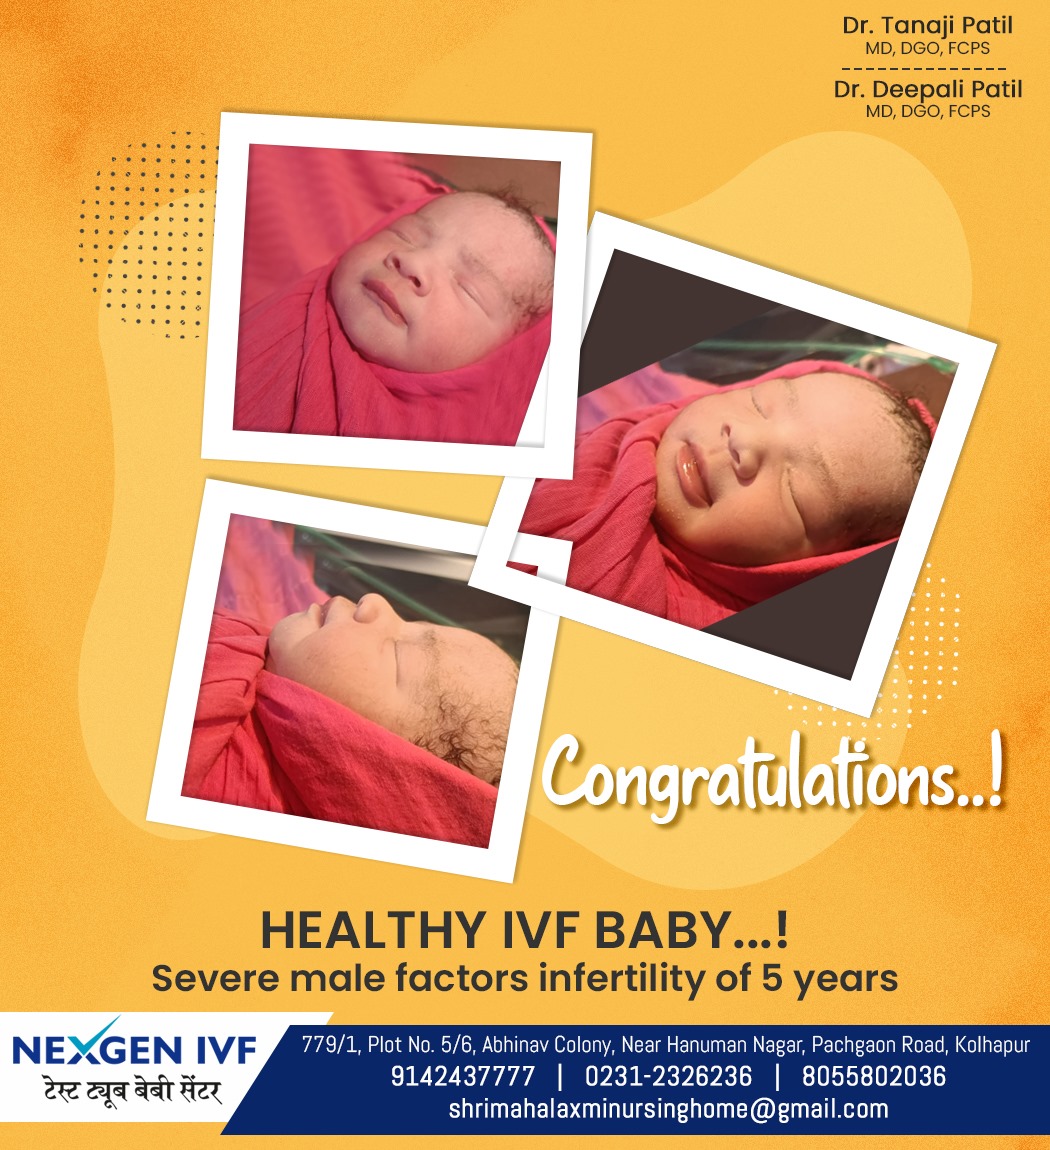 🏥NEXGEN IVF & FERTILITY CENTER, KOLHAPUR🏥

🔷Case of Severe Male Factors  of 5 years of Infertility.. 
✅Conceived in 1st Cycle of IVF.. 

🔷Happy to share with everyone about successfull parenthood of couple

#ferilitytreatment #fertiliitycenterindia #iuisuccess #ivfsuccess